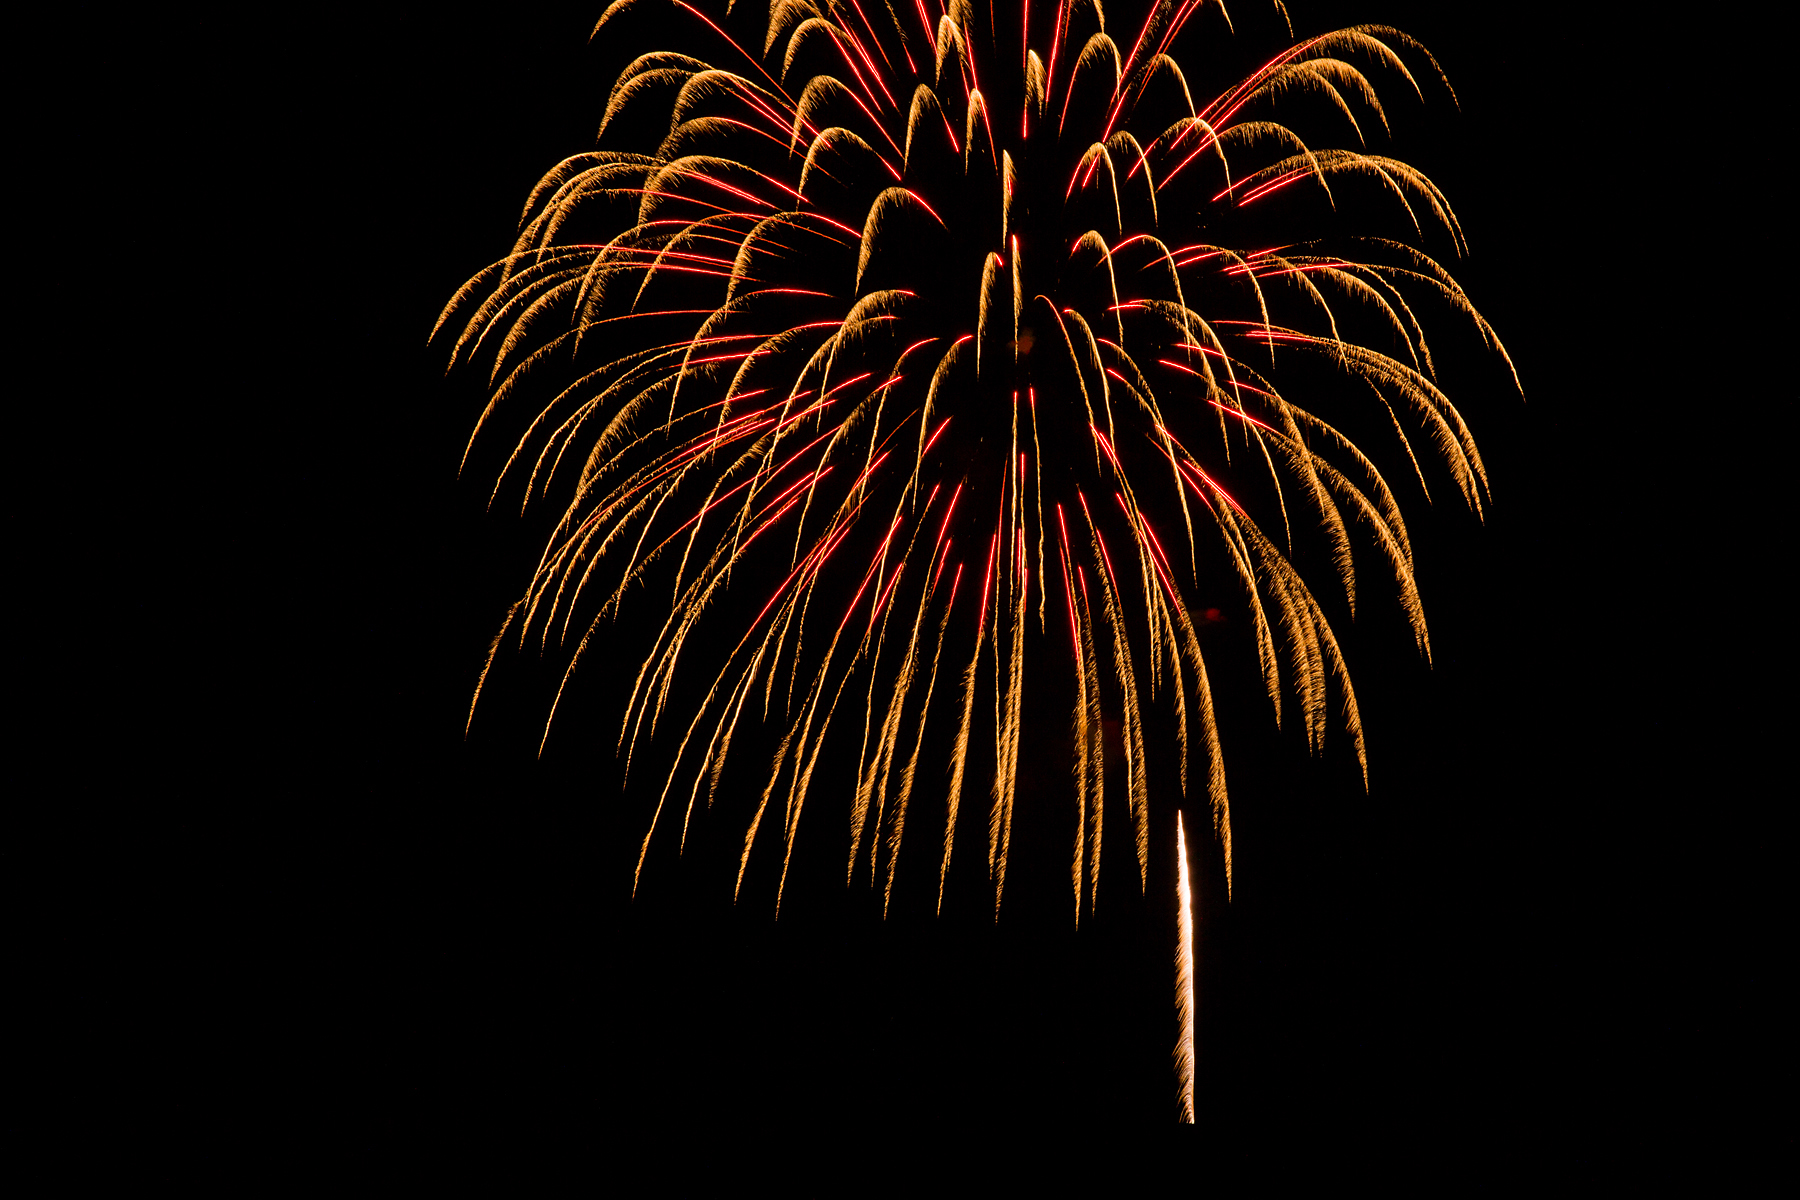 Fireworks, Red Lodge, MT, July 4, 2021.  Click for next photo.